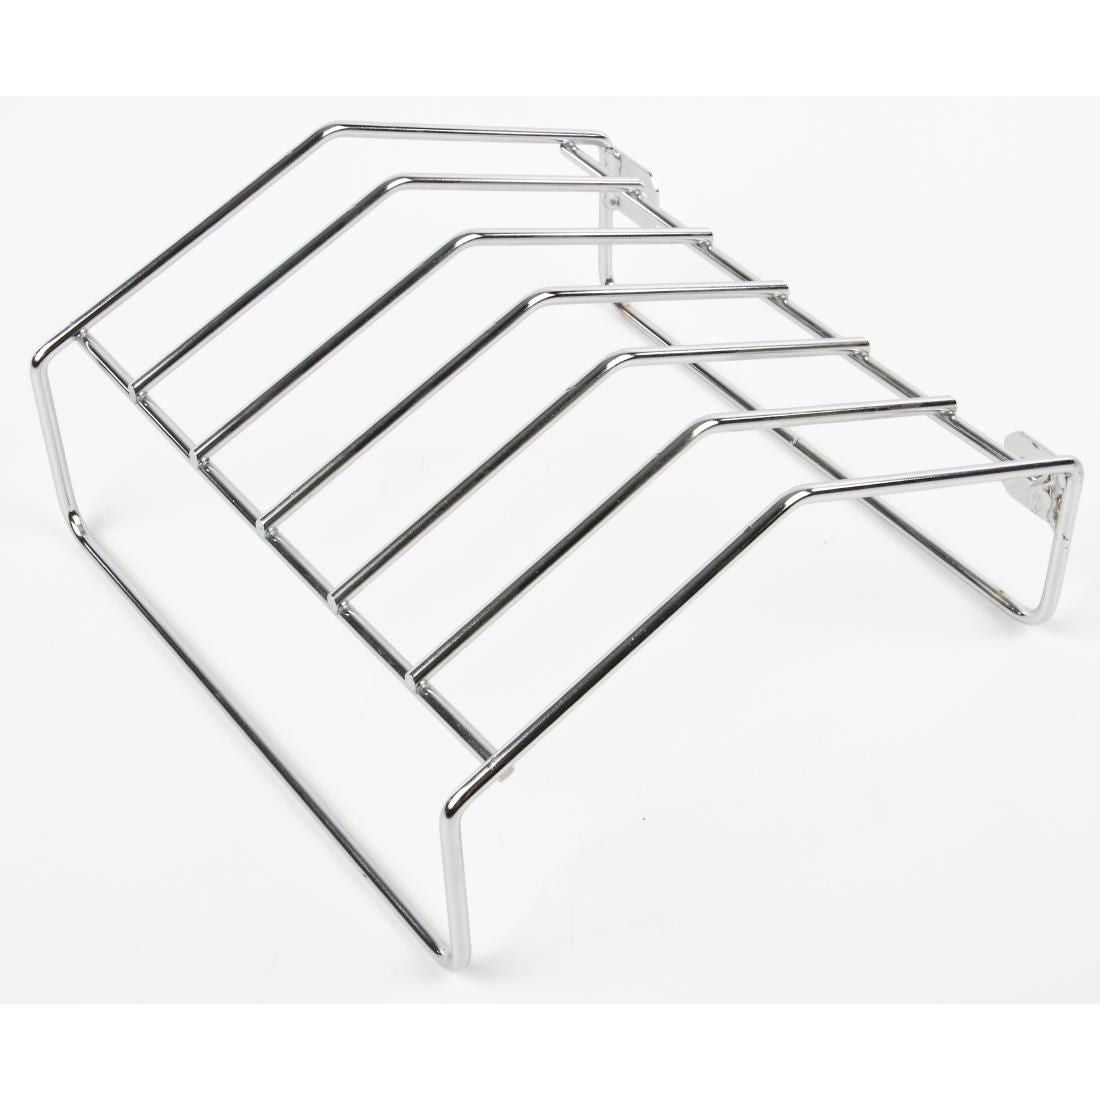 Chromed Wire Disc Holding Rack JD Catering Equipment Solutions Ltd